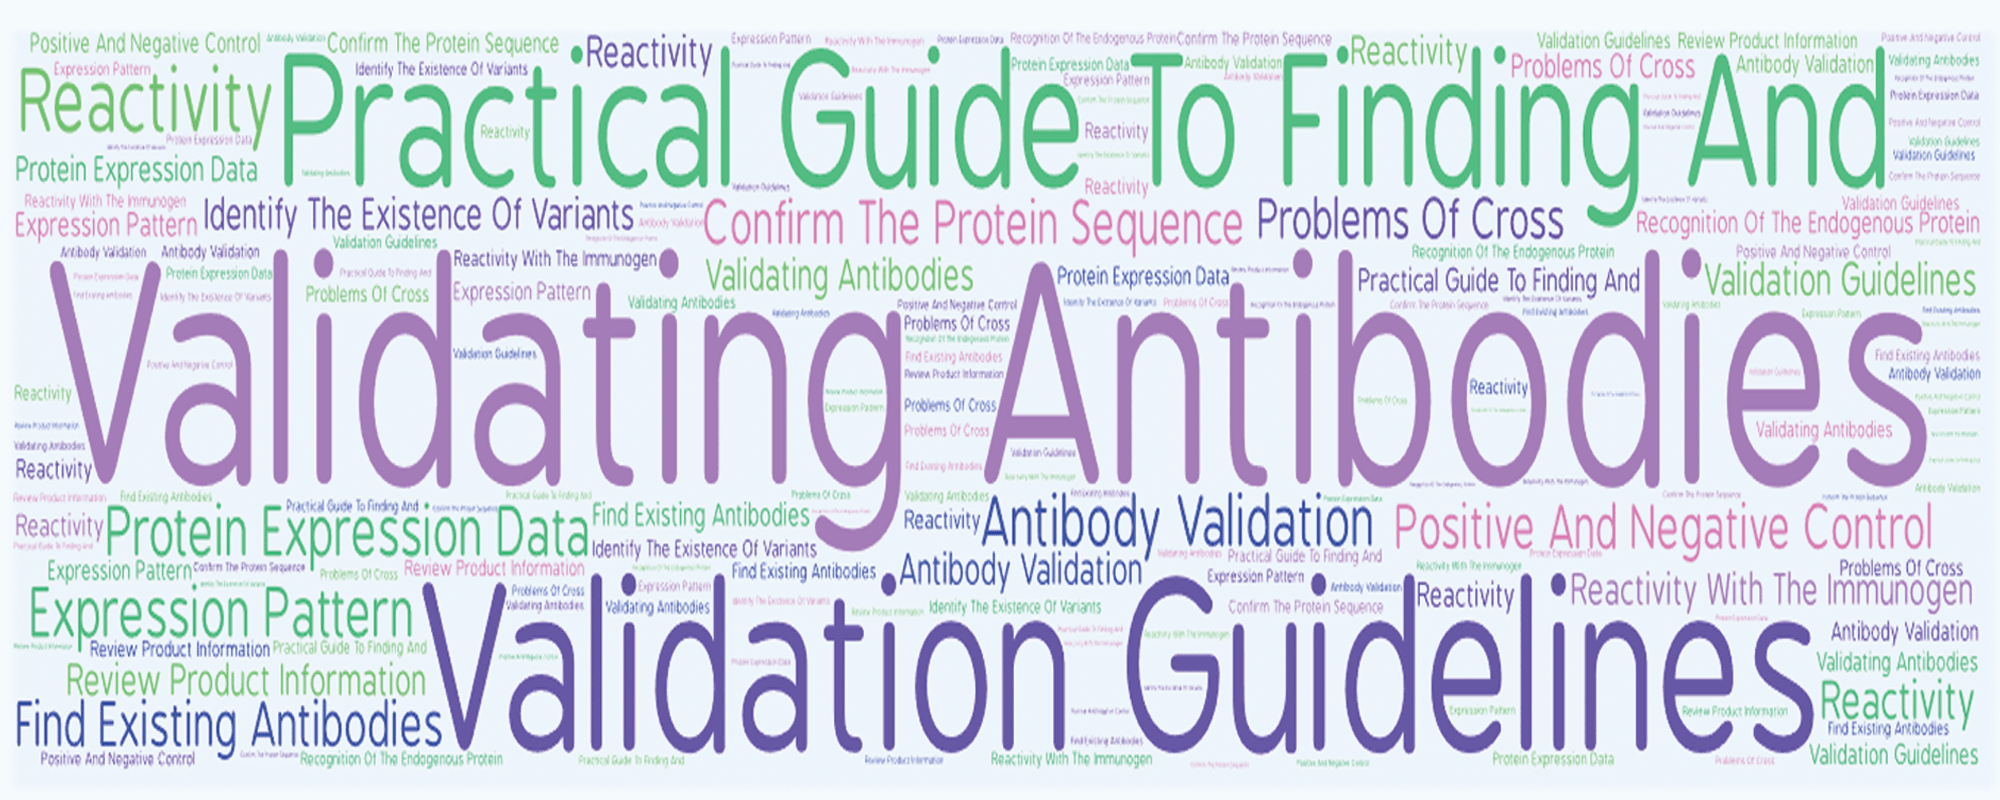 Practical guide to finding and validating suitable antibodies for research